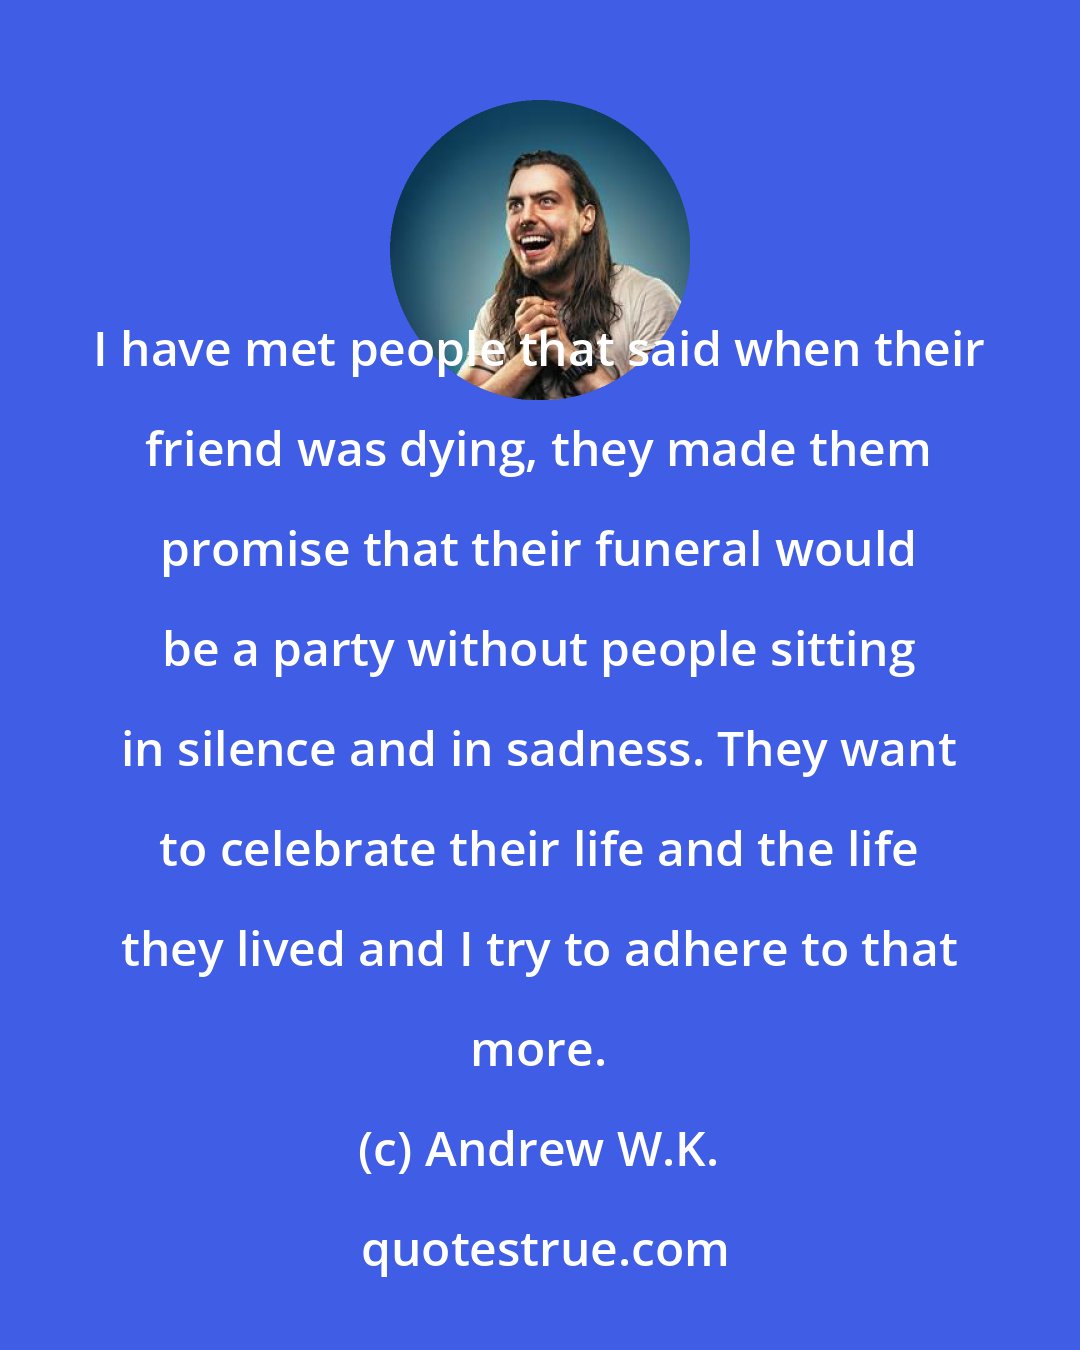 Andrew W.K.: I have met people that said when their friend was dying, they made them promise that their funeral would be a party without people sitting in silence and in sadness. They want to celebrate their life and the life they lived and I try to adhere to that more.